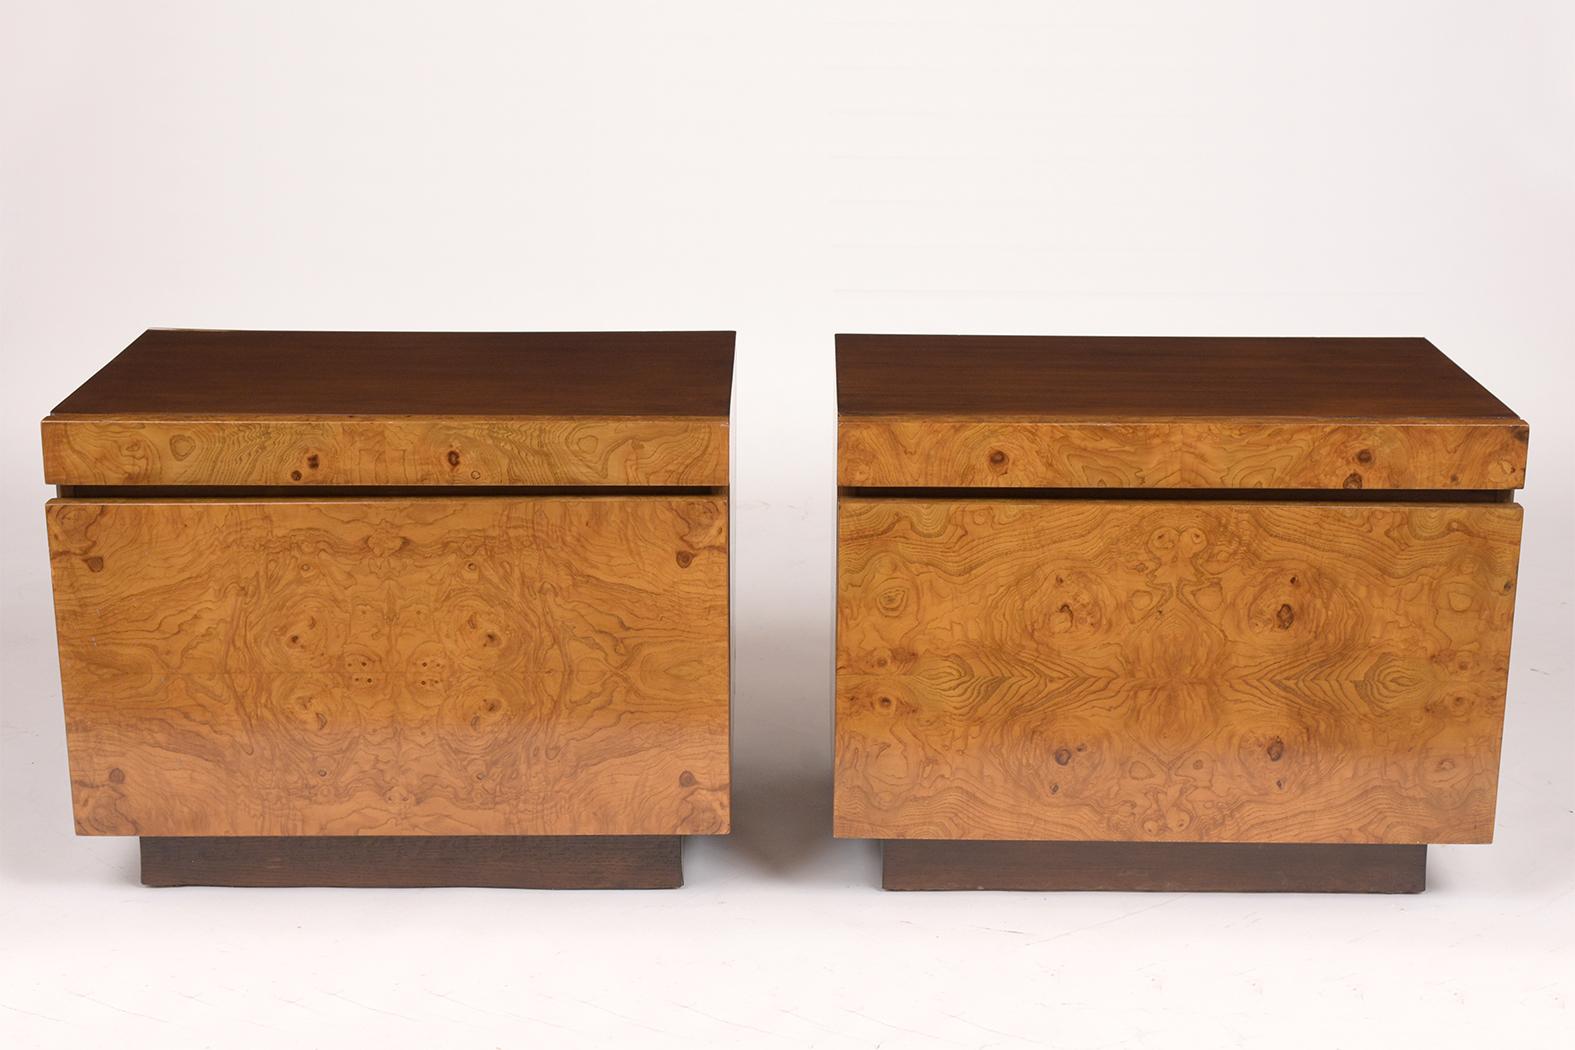 This pair of 1960s Burled Milo Baughman style nightstands are in great condition and feature a newly lacquered finish. The pair has a walnut colored frame and the two pull-outs are covered in a rich oak colored veneer. They also come with a pull-out